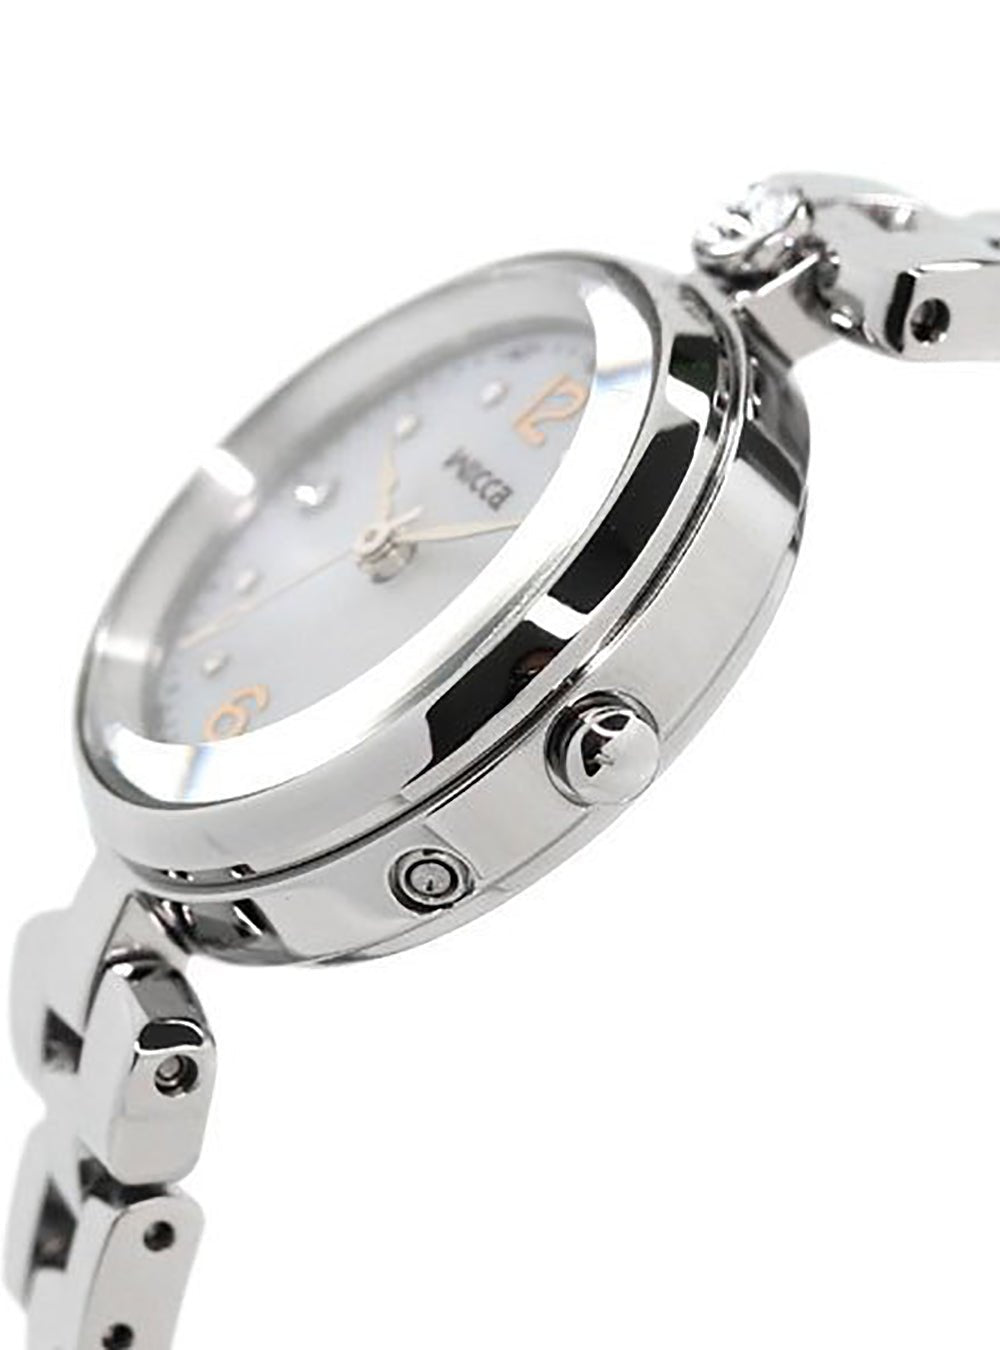 CITIZEN) Watch Wicca Solar Tech Tiara Star Collection KP5-662-51 Ladies  Pink Gold - Discovery Japan Mall